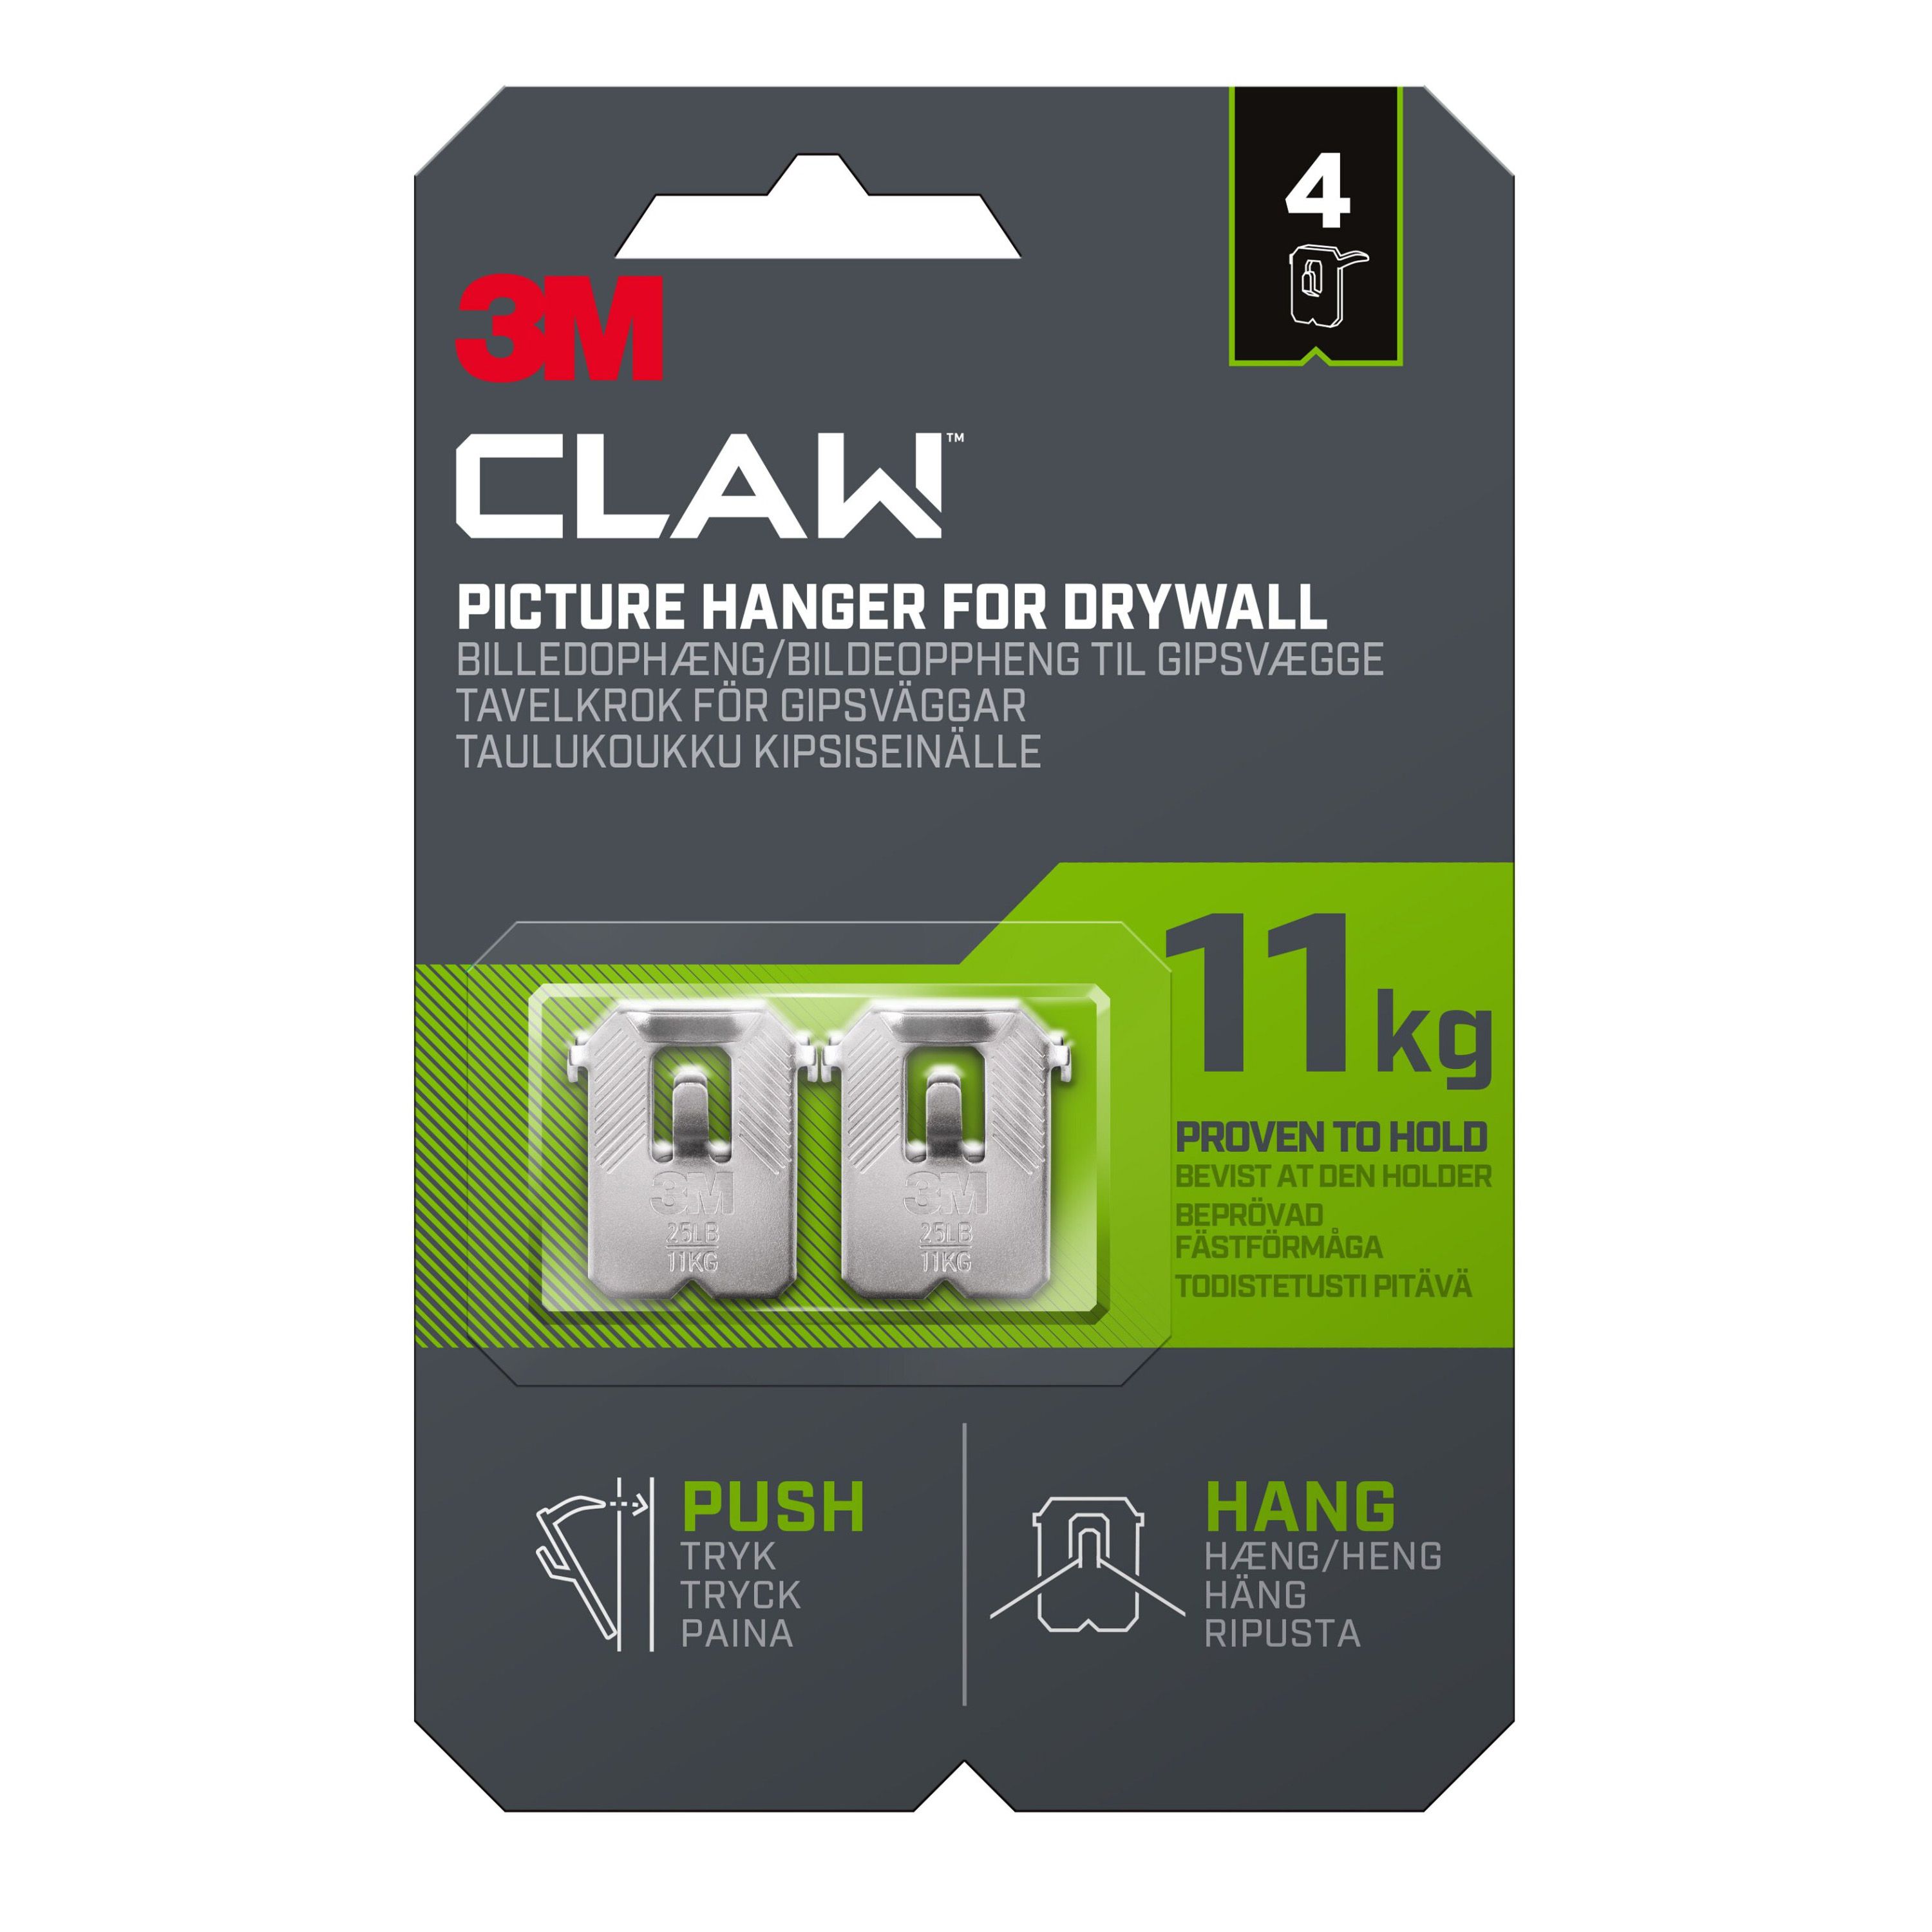 https://media.diy.com/is/image/Kingfisher/3m-claw-drywall-picture-hanger-h-31-5mm-w-27mm-pack-of-4~4064035002312_01c_bq?$MOB_PREV$&$width=768&$height=768